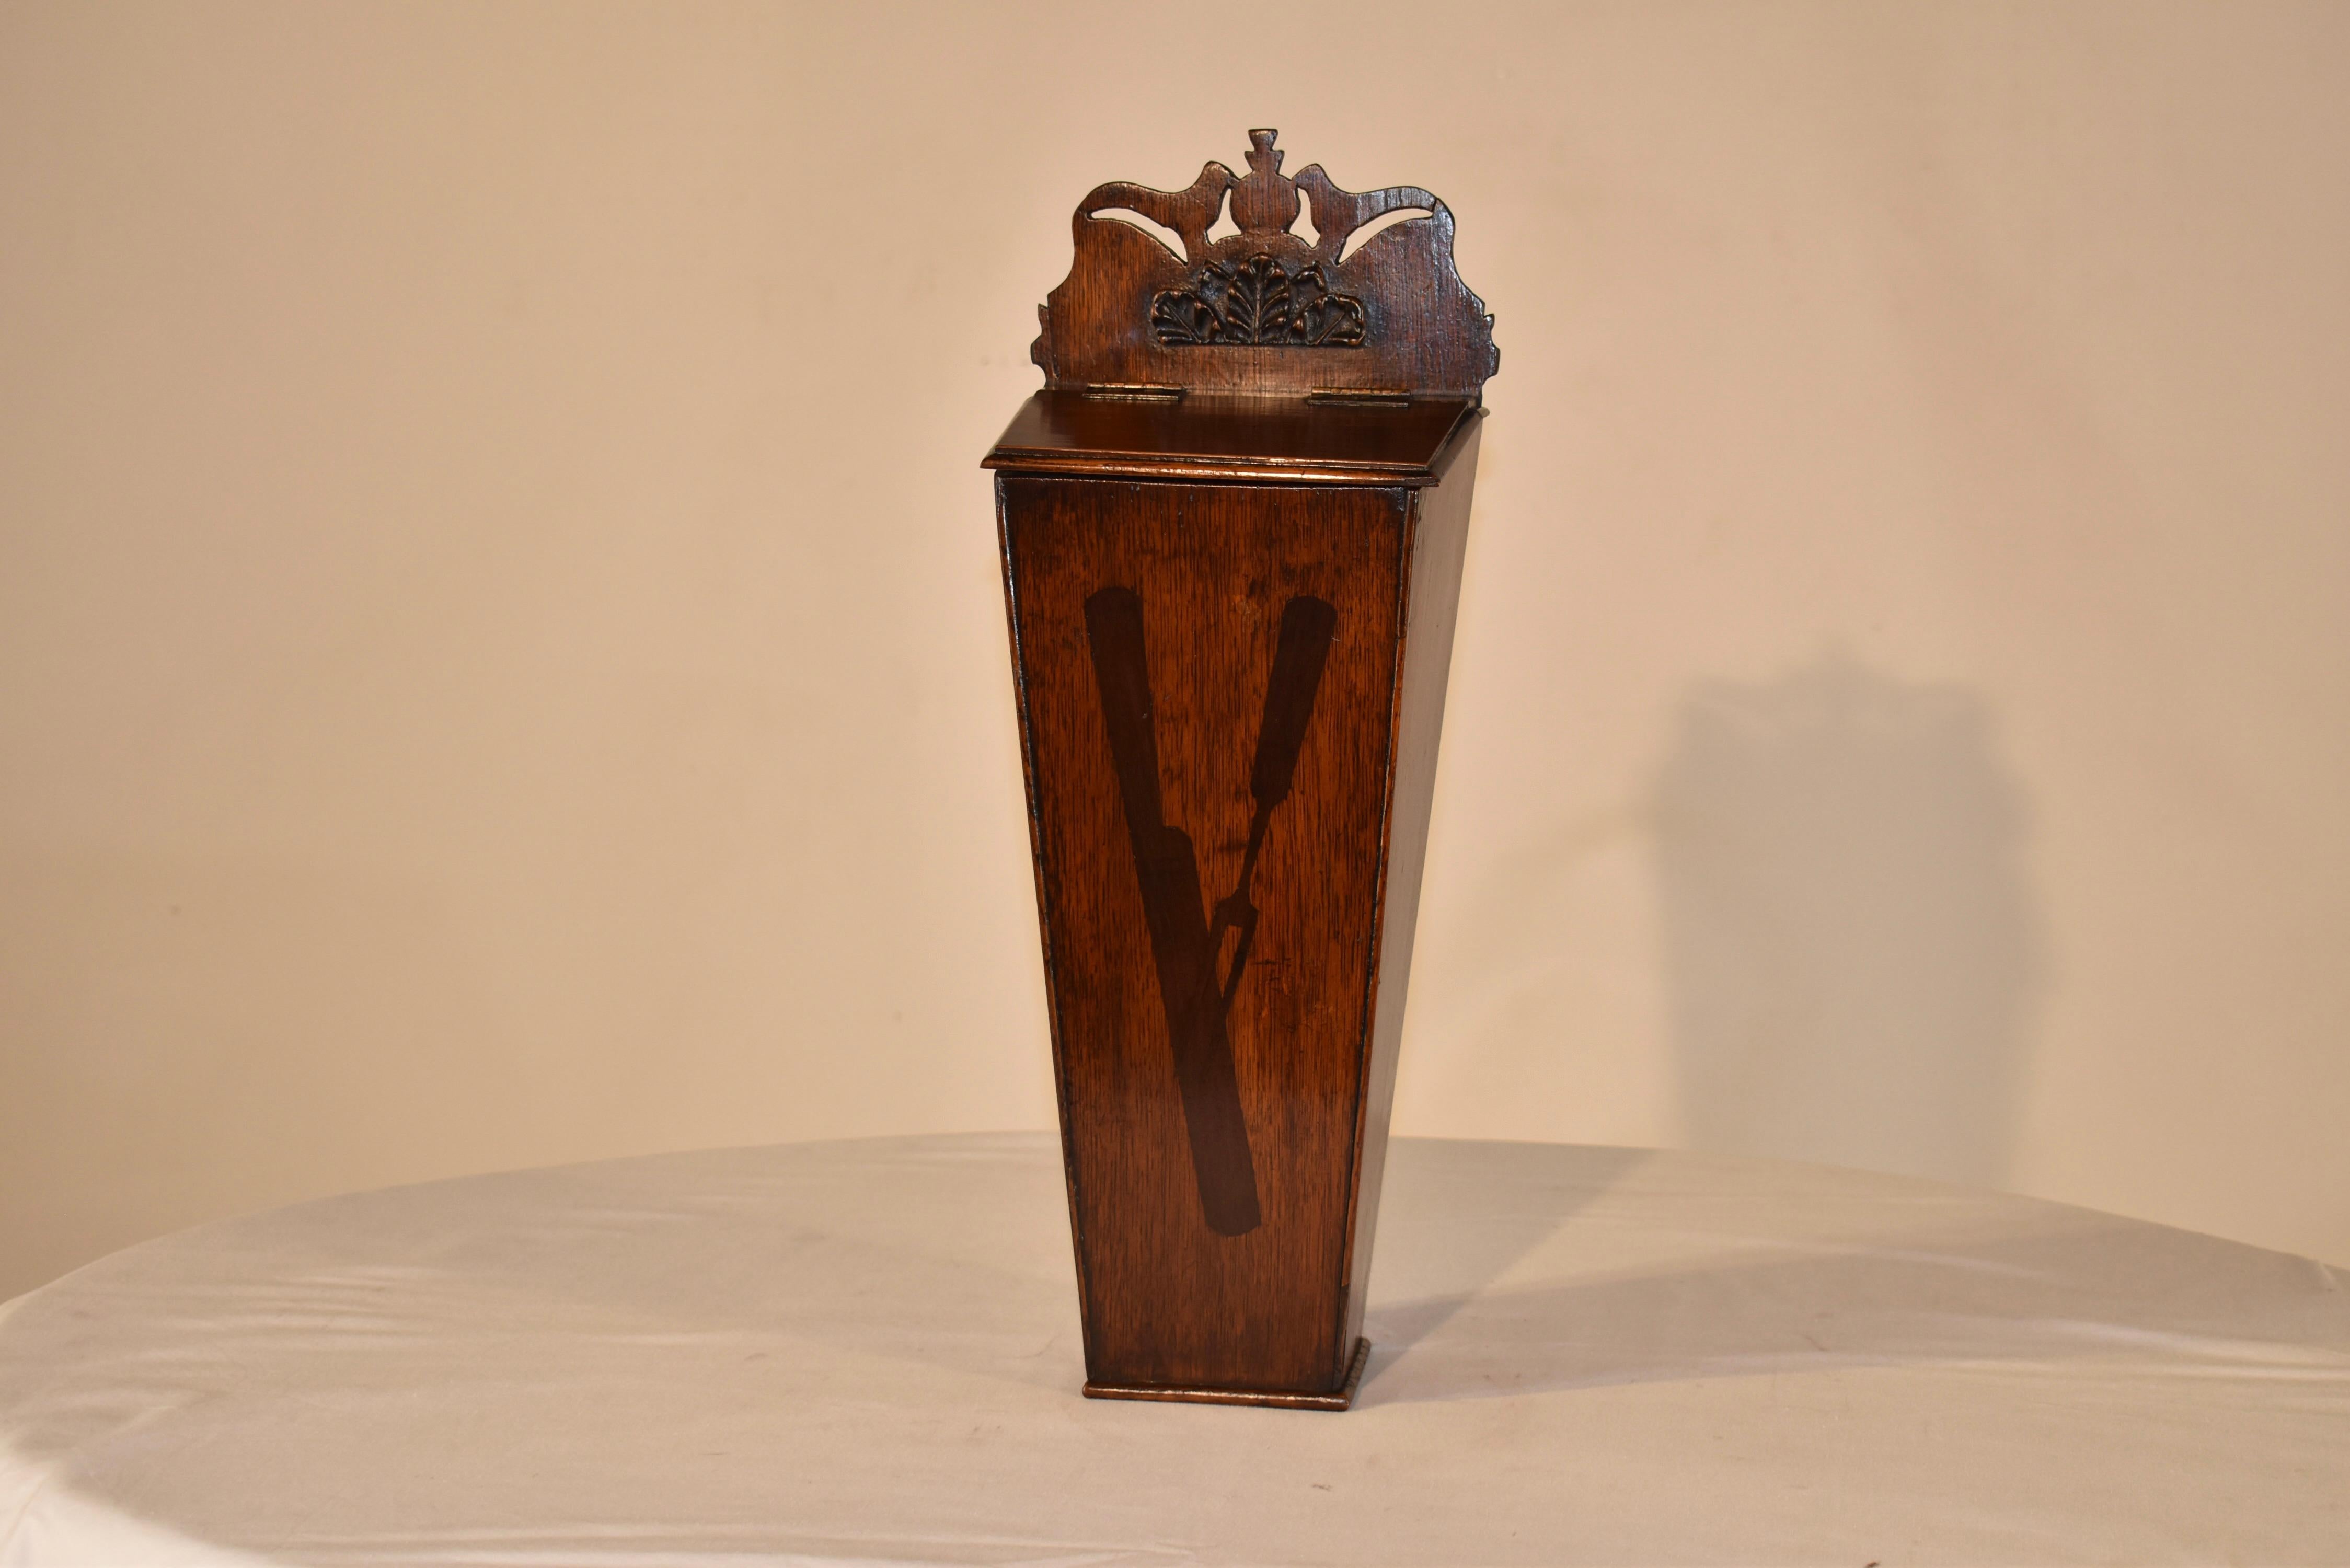 Early 19th century oak candle box from England.  The box has a wonderfully hand carved top with two opposing birds flanking a central pineapple.  These symbols were also synonymous with welcoming guests into your home.  Below the birds, there is a